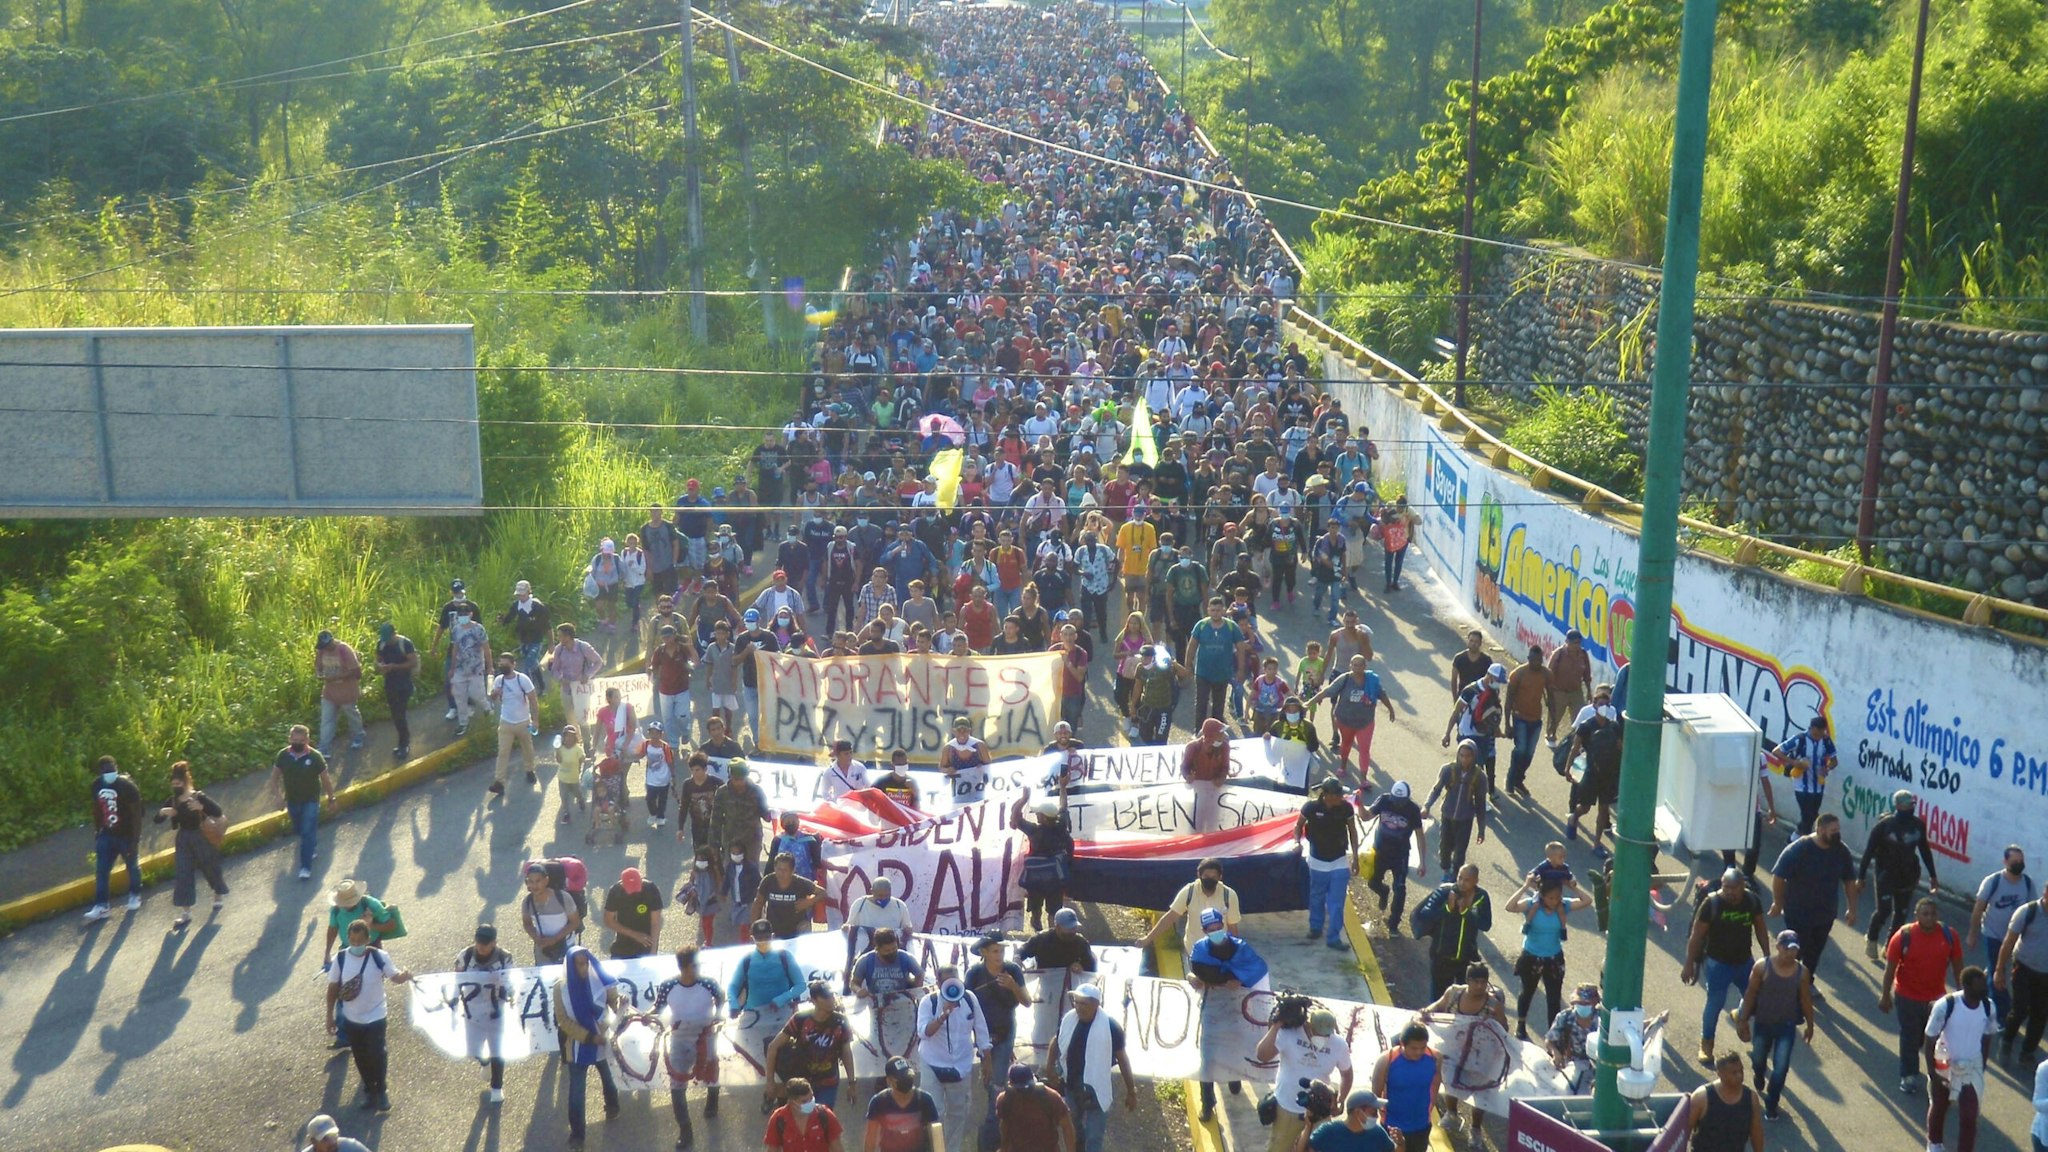 TAPACHULA, CHIAPAS, MEXICO - OCTOBER 22: Migrant caravan made up of approximately 3,000 people, called March for Freedom, Dignity and La Paz, managed to break the first police siege of the National Institute of Migration, National Guard and State Police that he was on the outskirts of Tapachula, Chiapas in Mexico on October 22, 2021. They continue on their way to Mexico City.